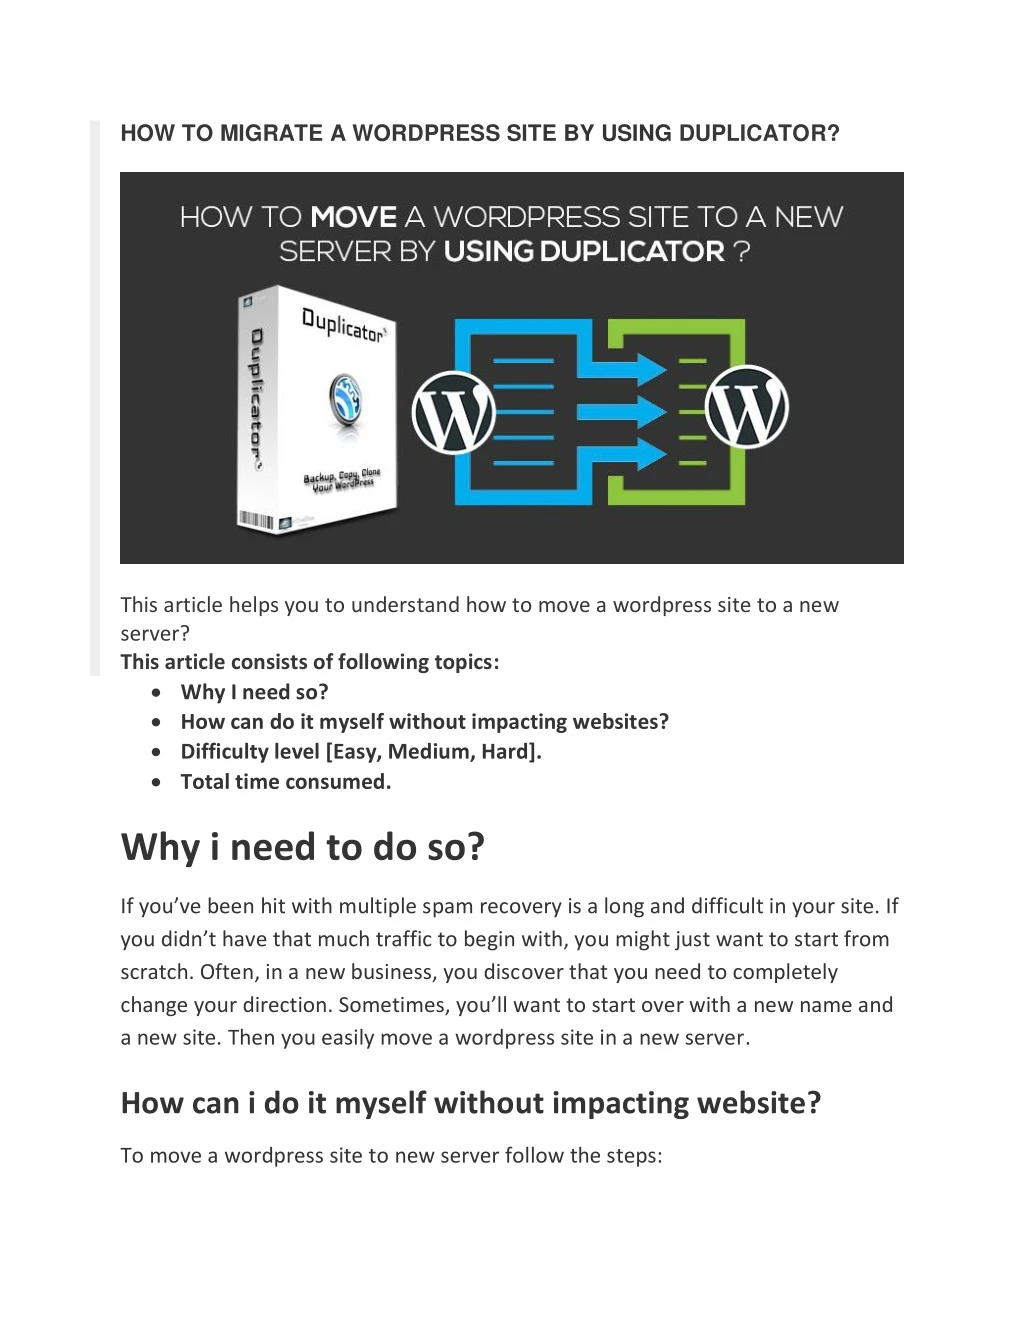 how to migrate a wordpress site by using